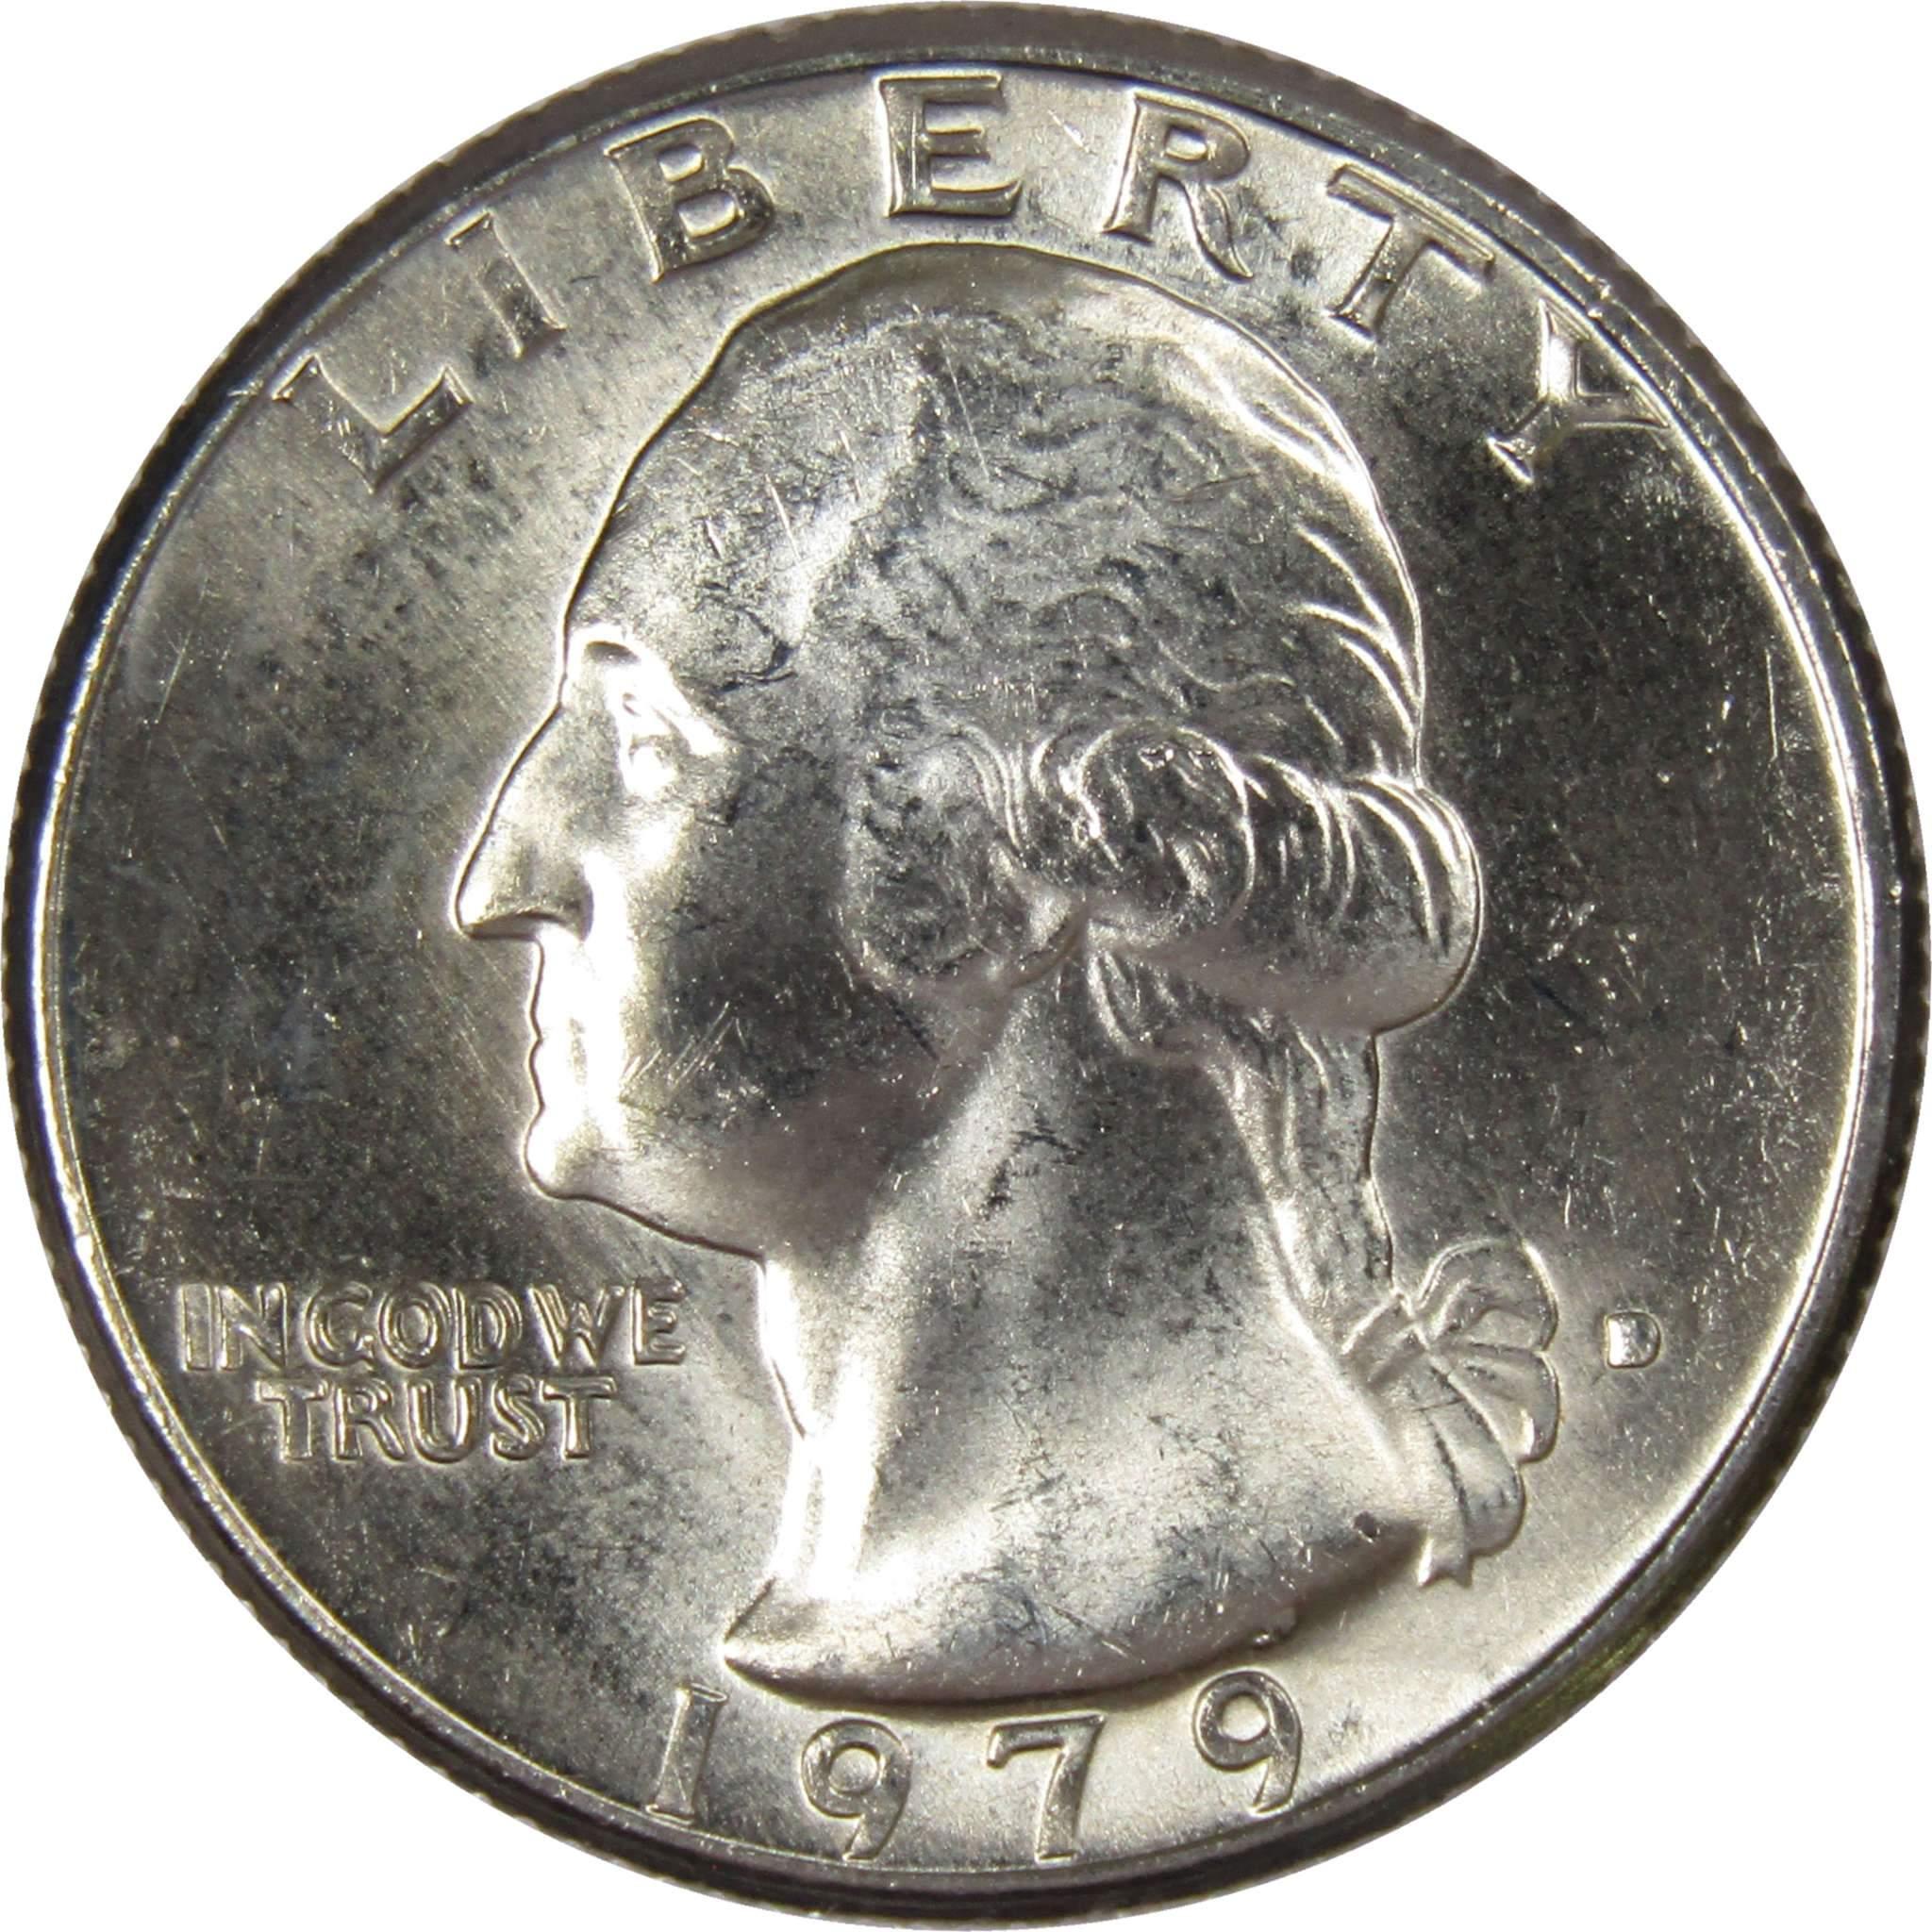 1979 D Washington Quarter BU Uncirculated Mint State 25c US Coin Collectible